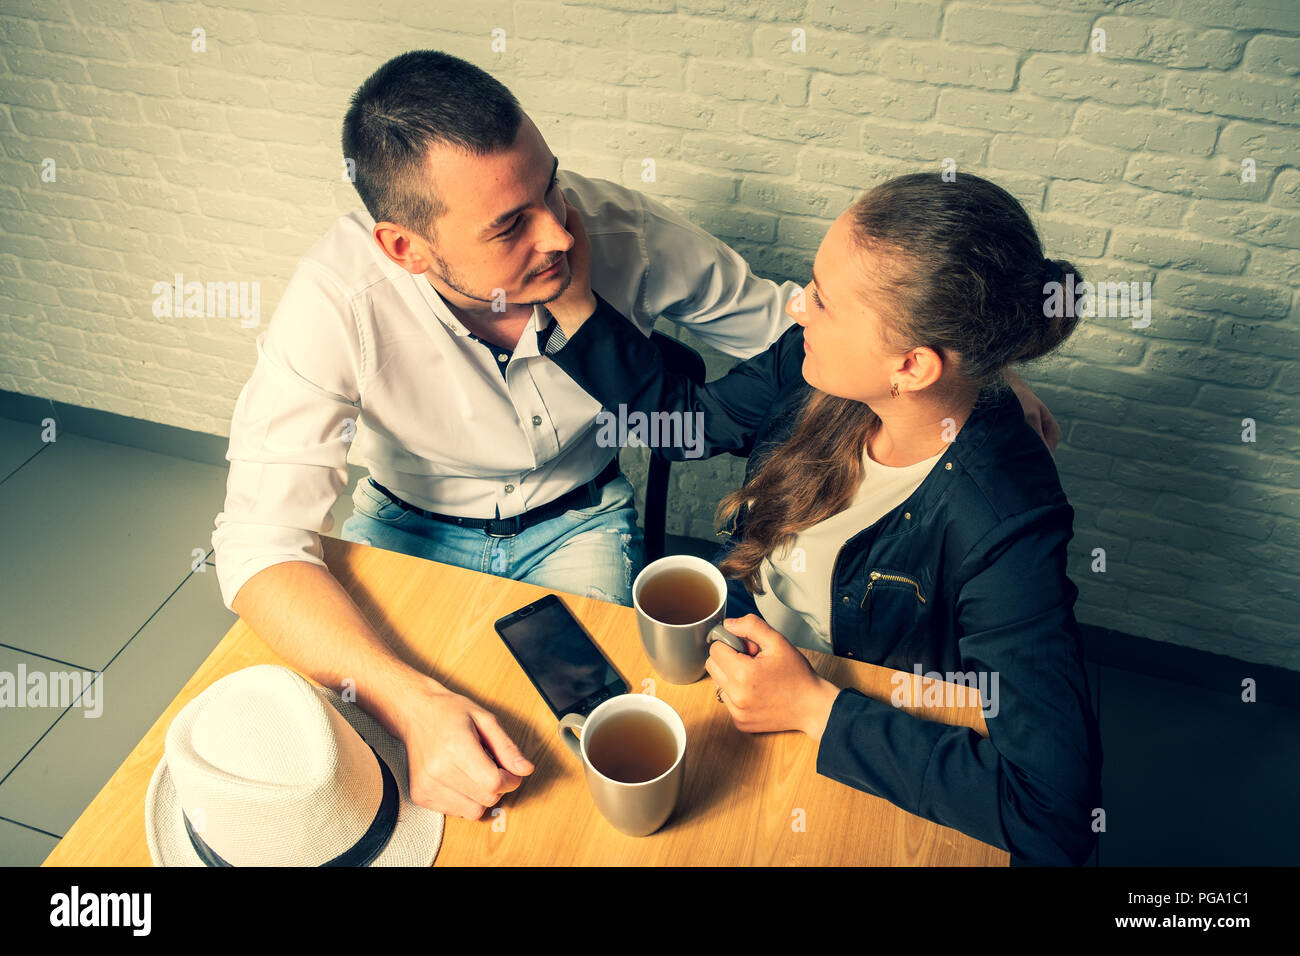 The girl and the guy in cafe, at a table, talk. The guy and the girl with love and tenderness look at each other. On a table there is a tea, phone and Stock Photo